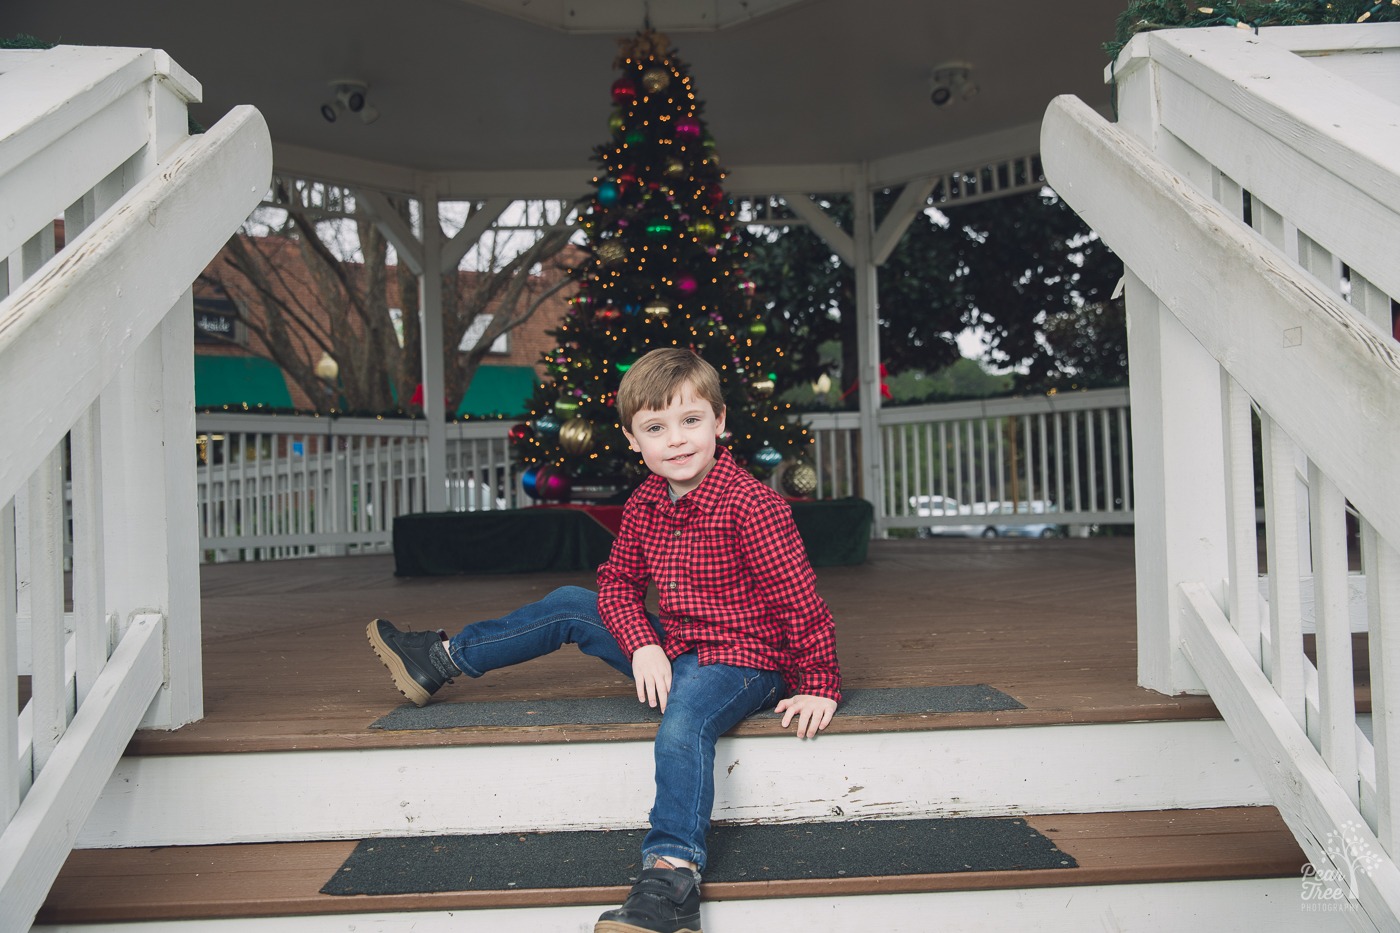 Cute four year old photoshoot with a boy sitting relaxed with his arm on his leg on steps in front of a Christmas tree